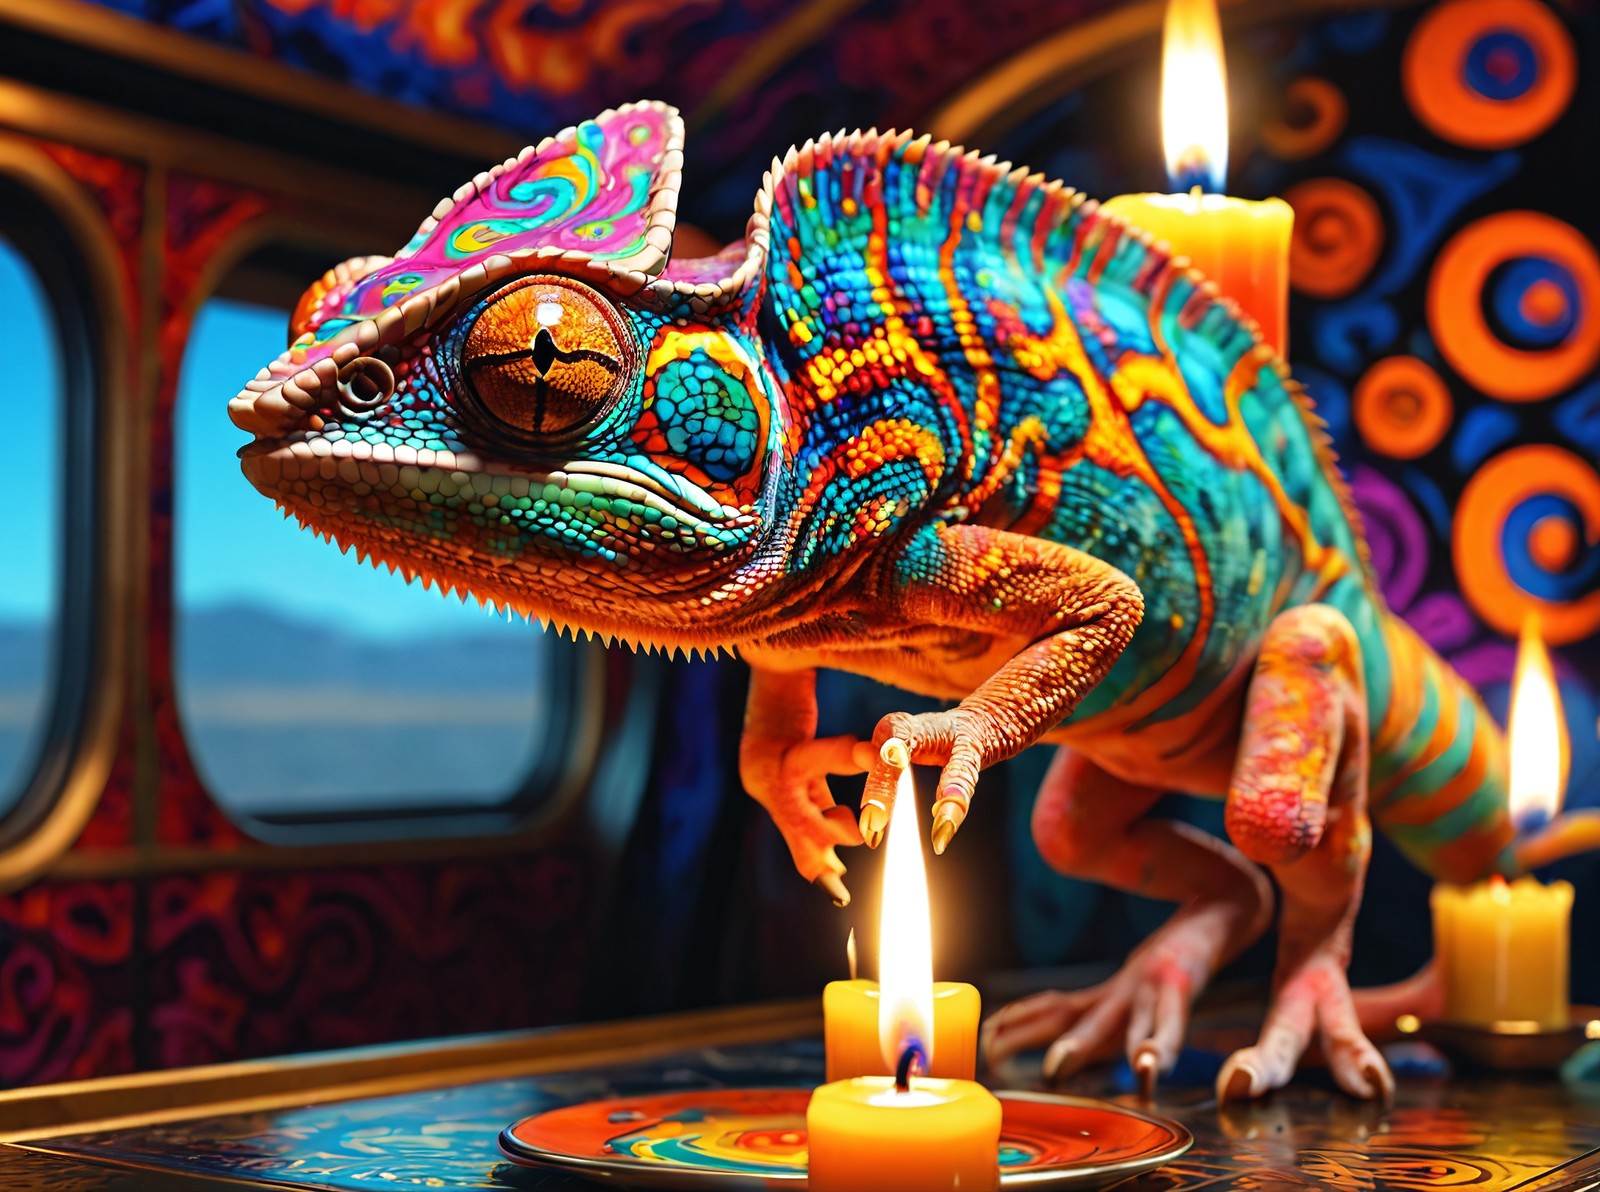 Chameleon,Butters Stotch;male,Bene Gesserit,Stable,High-speed Train,Psychedelic style Vibrant colors swirling patterns abs...